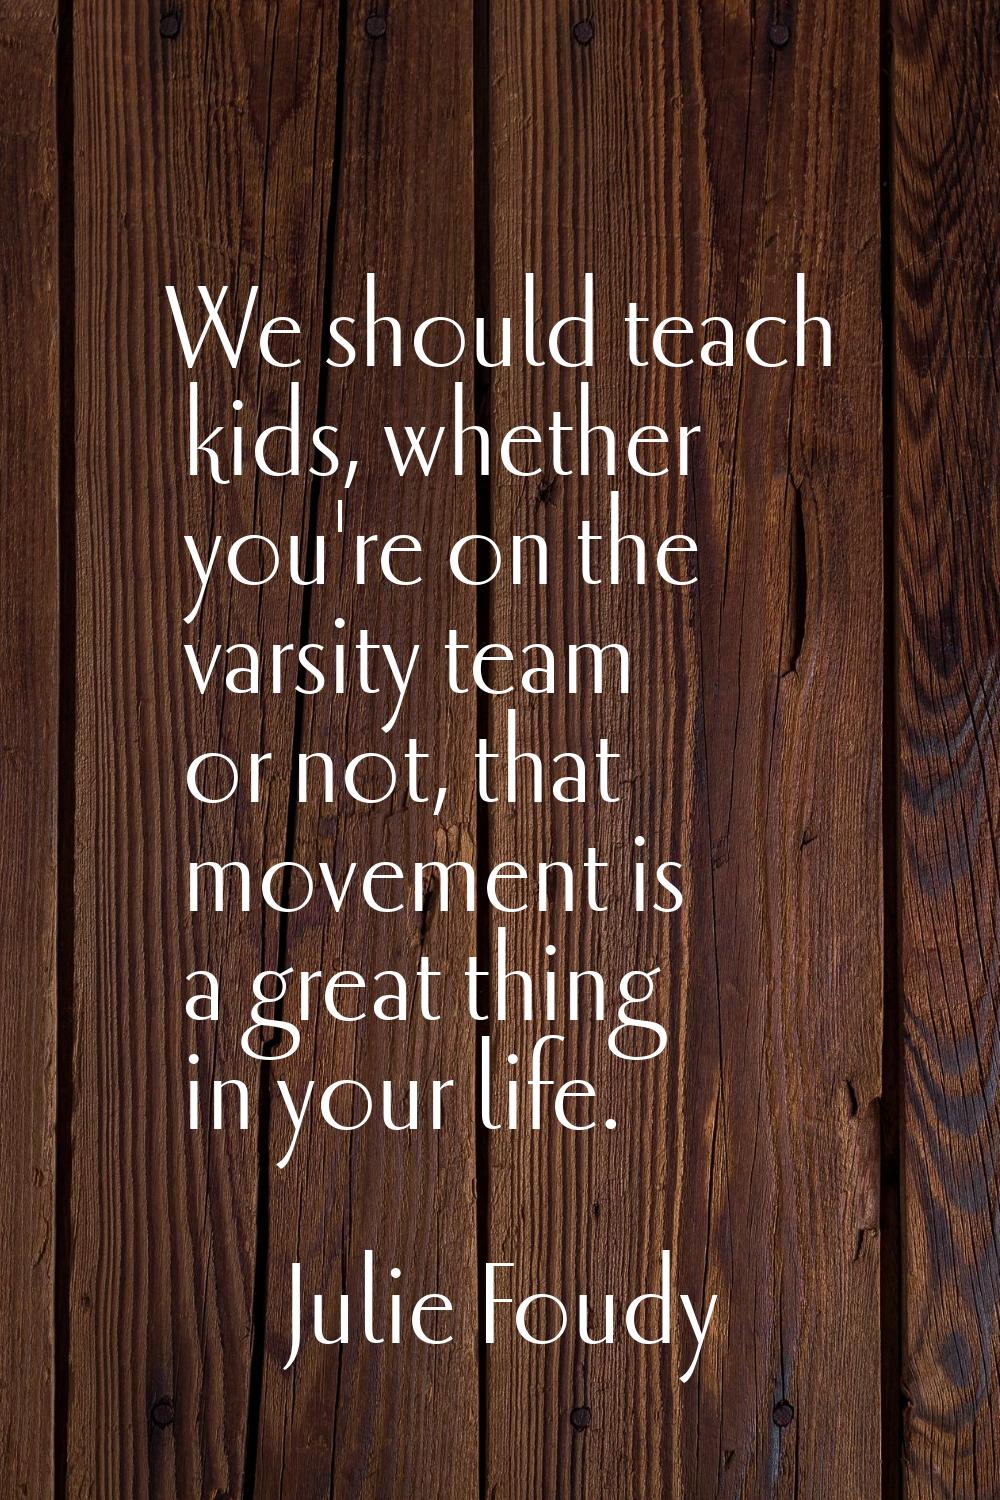 We should teach kids, whether you're on the varsity team or not, that movement is a great thing in 